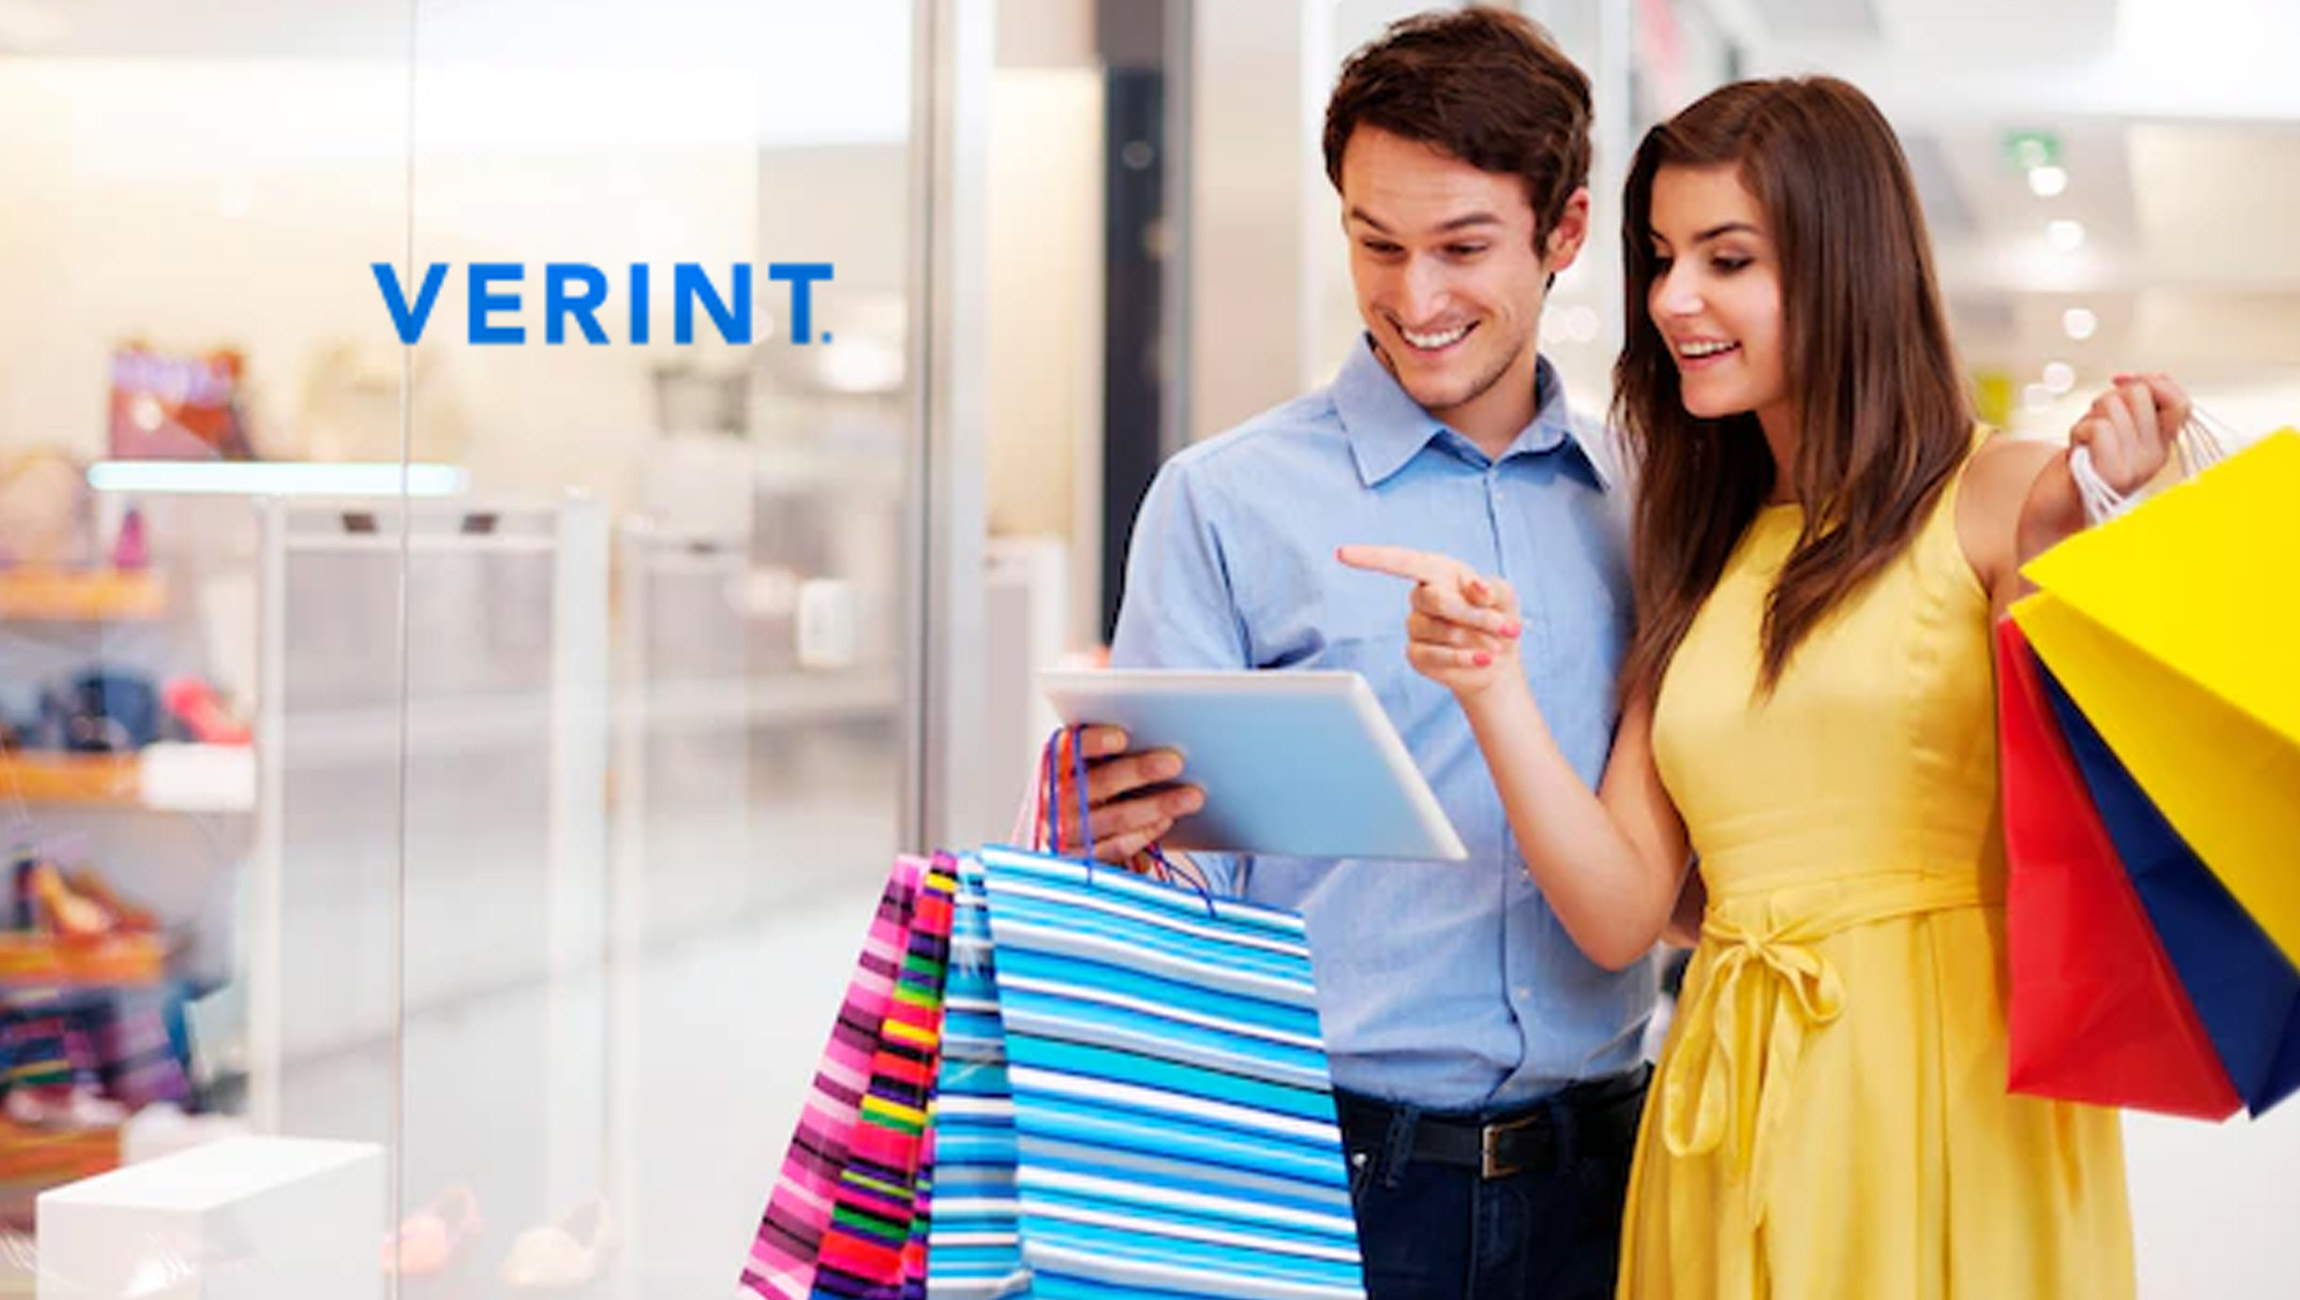 Verint Survey Shows Gen Z’s Growing Preference for Digital-First Shopping and the Vital Importance of Digital Experience